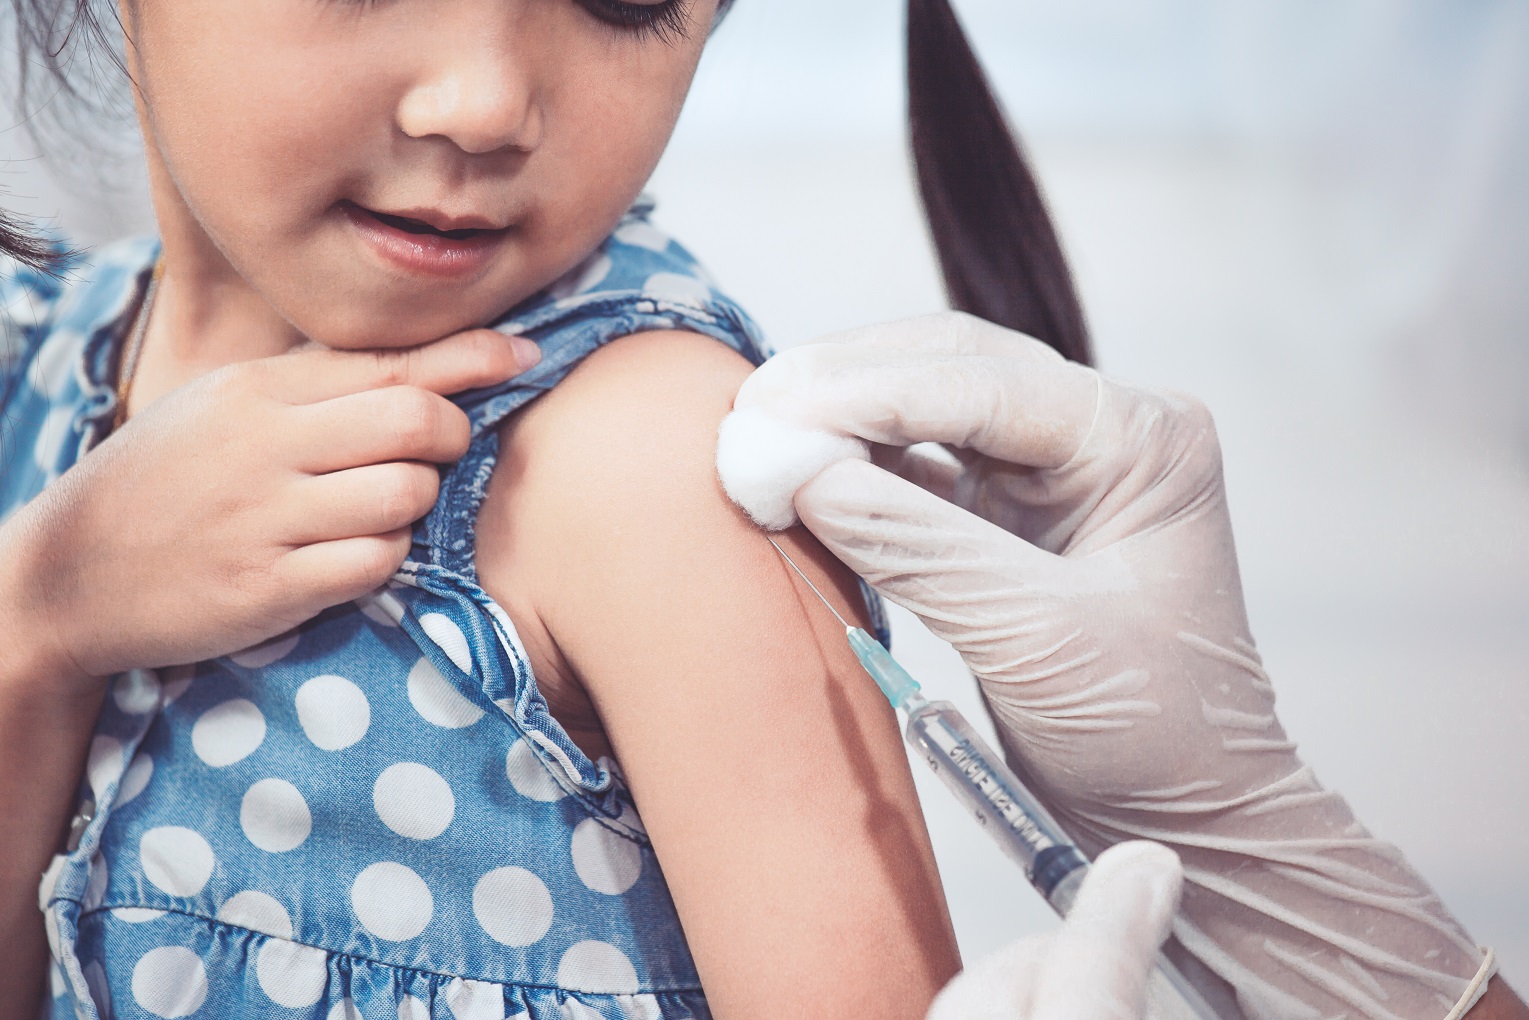 A young girl wearing a blue and white polka dotted top looks at the hand of her doctor who is applying alcohol to her shoulder before giving her an immunization.